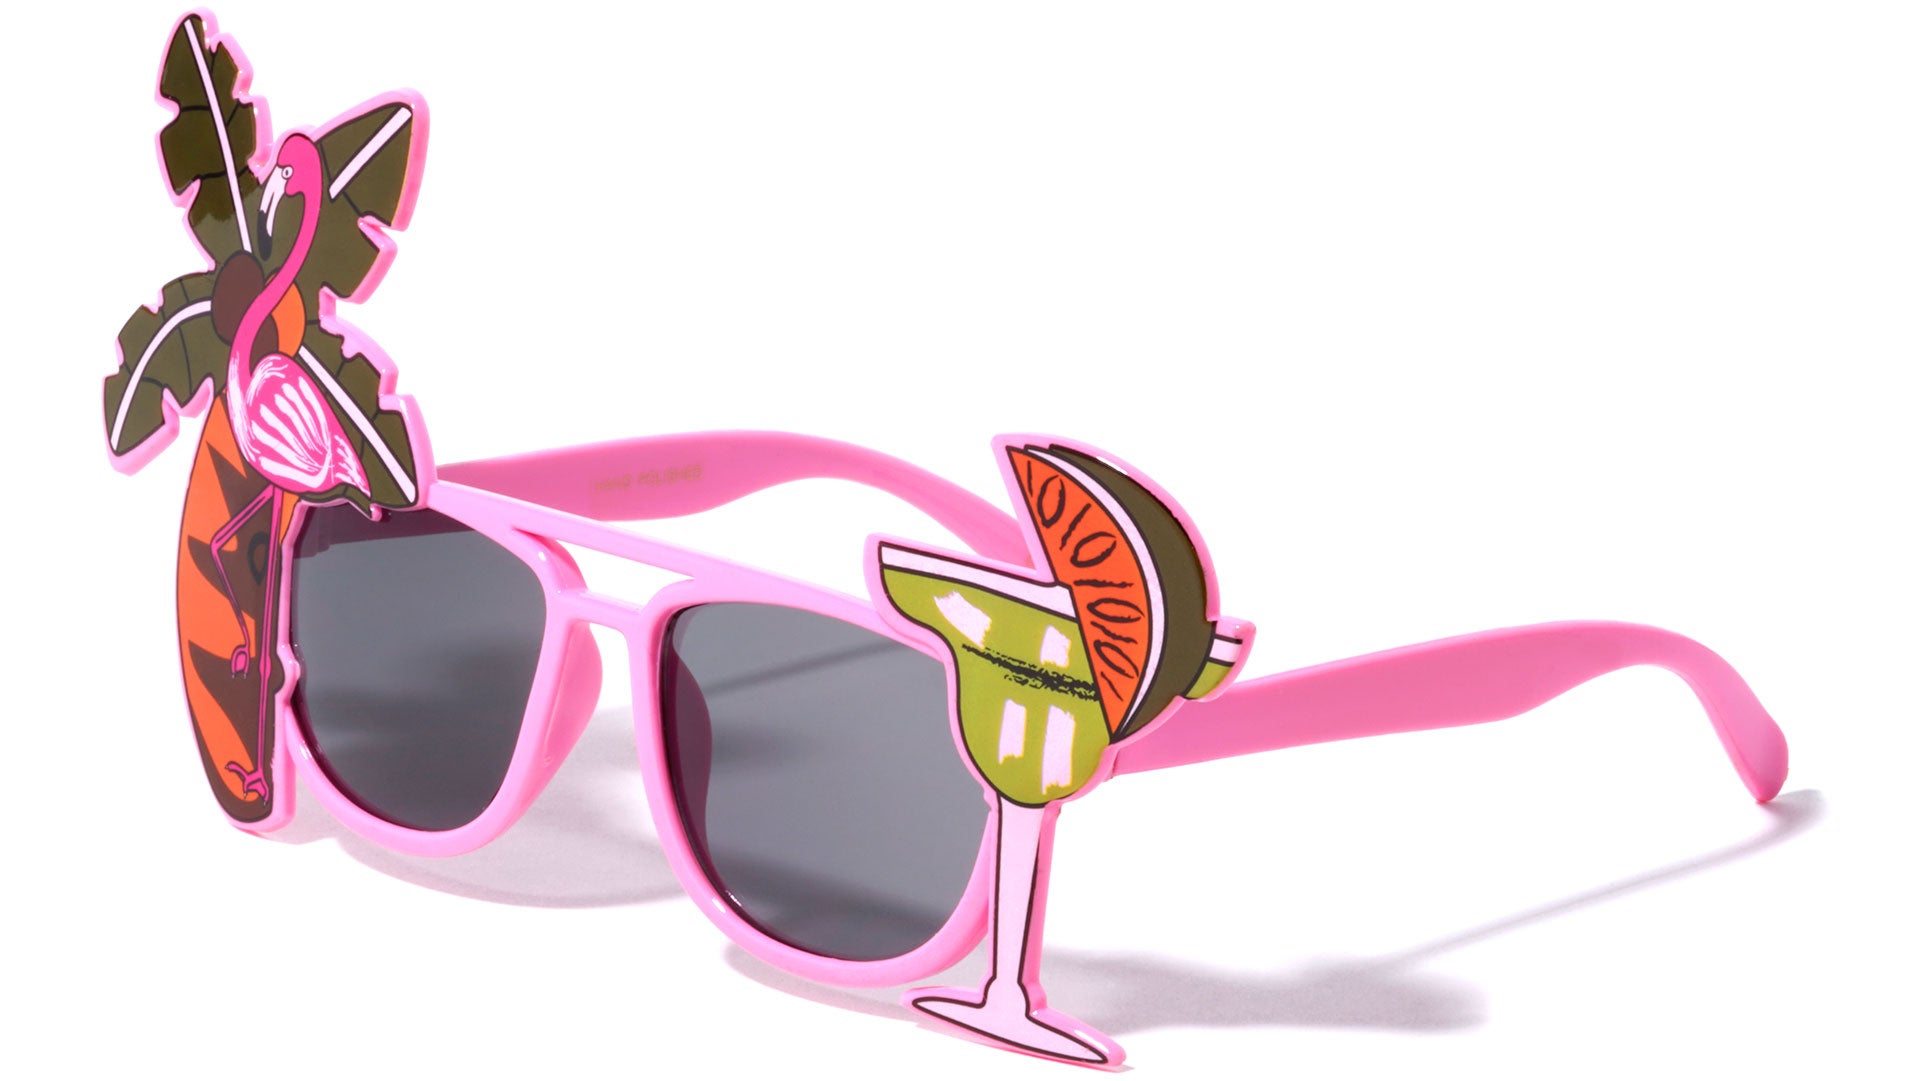 Tropical - Theme Fashion, Party Glasses Vacation Frontier